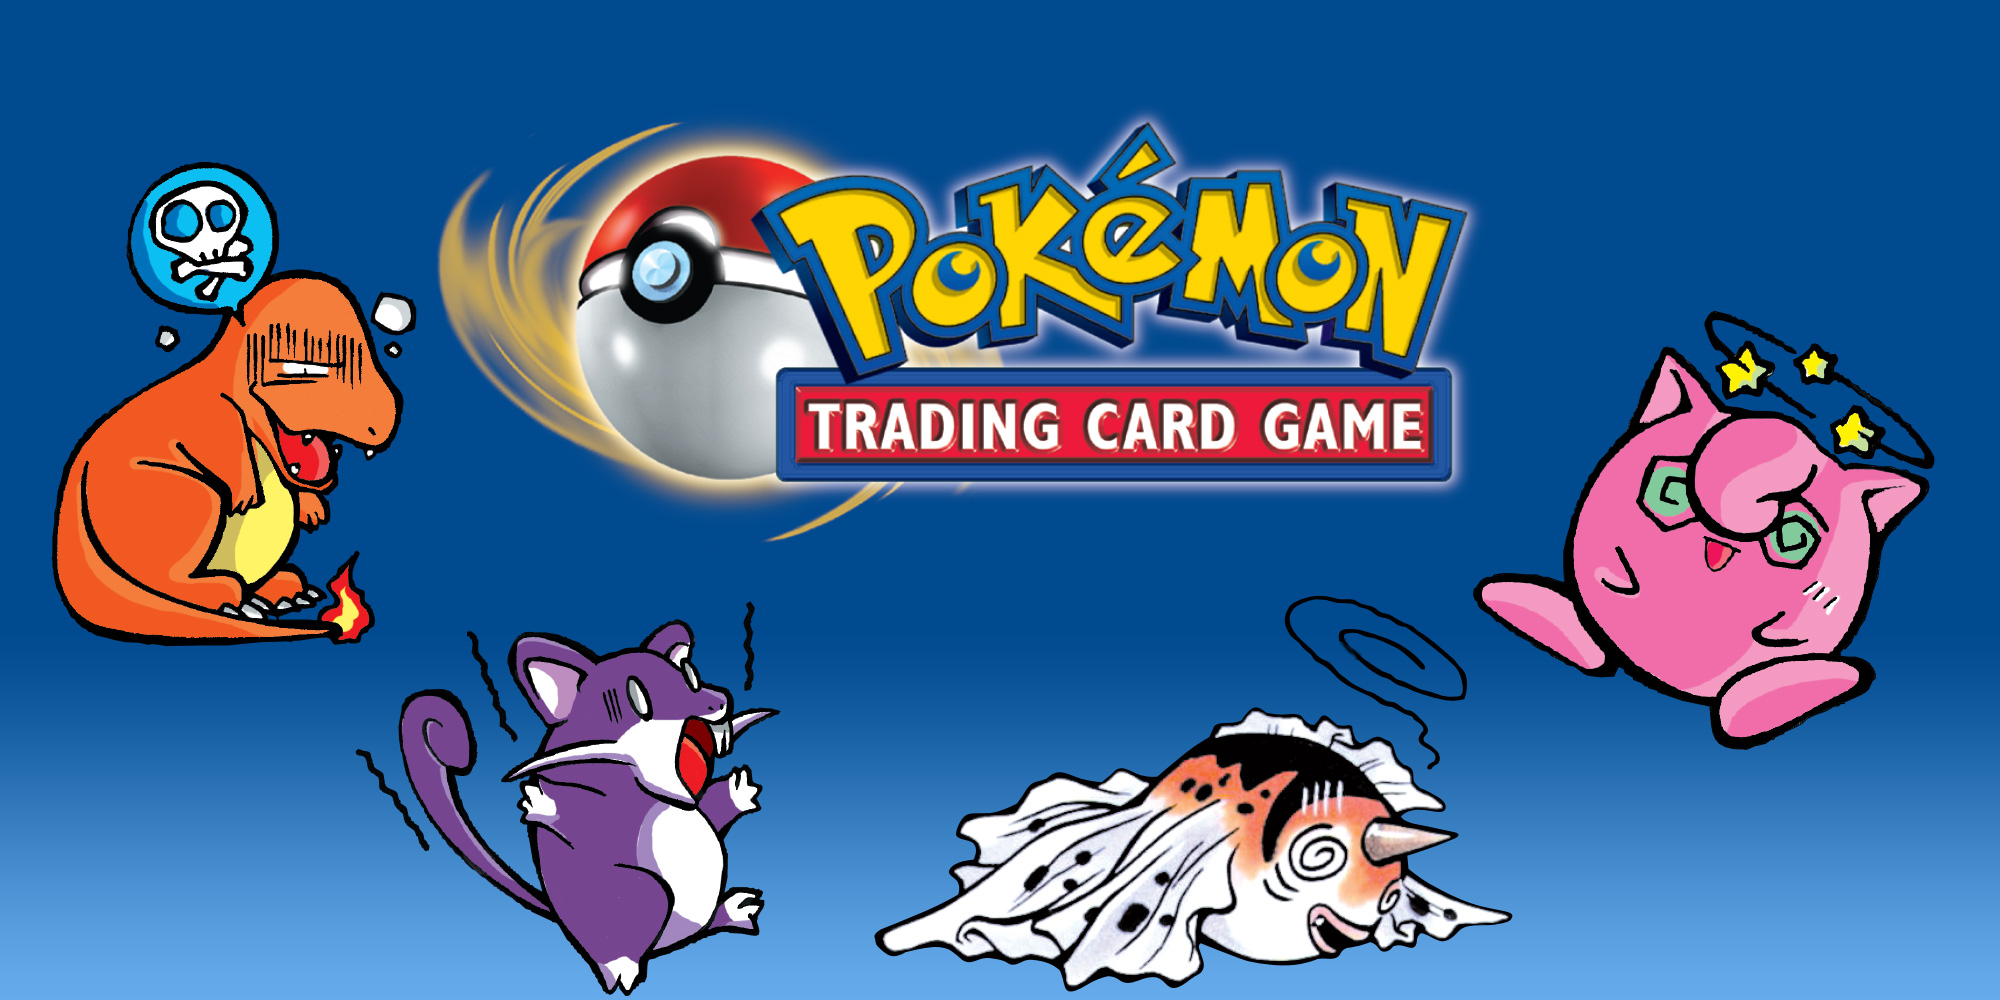 You can get the Pokémon Trading Card video game on Switch right